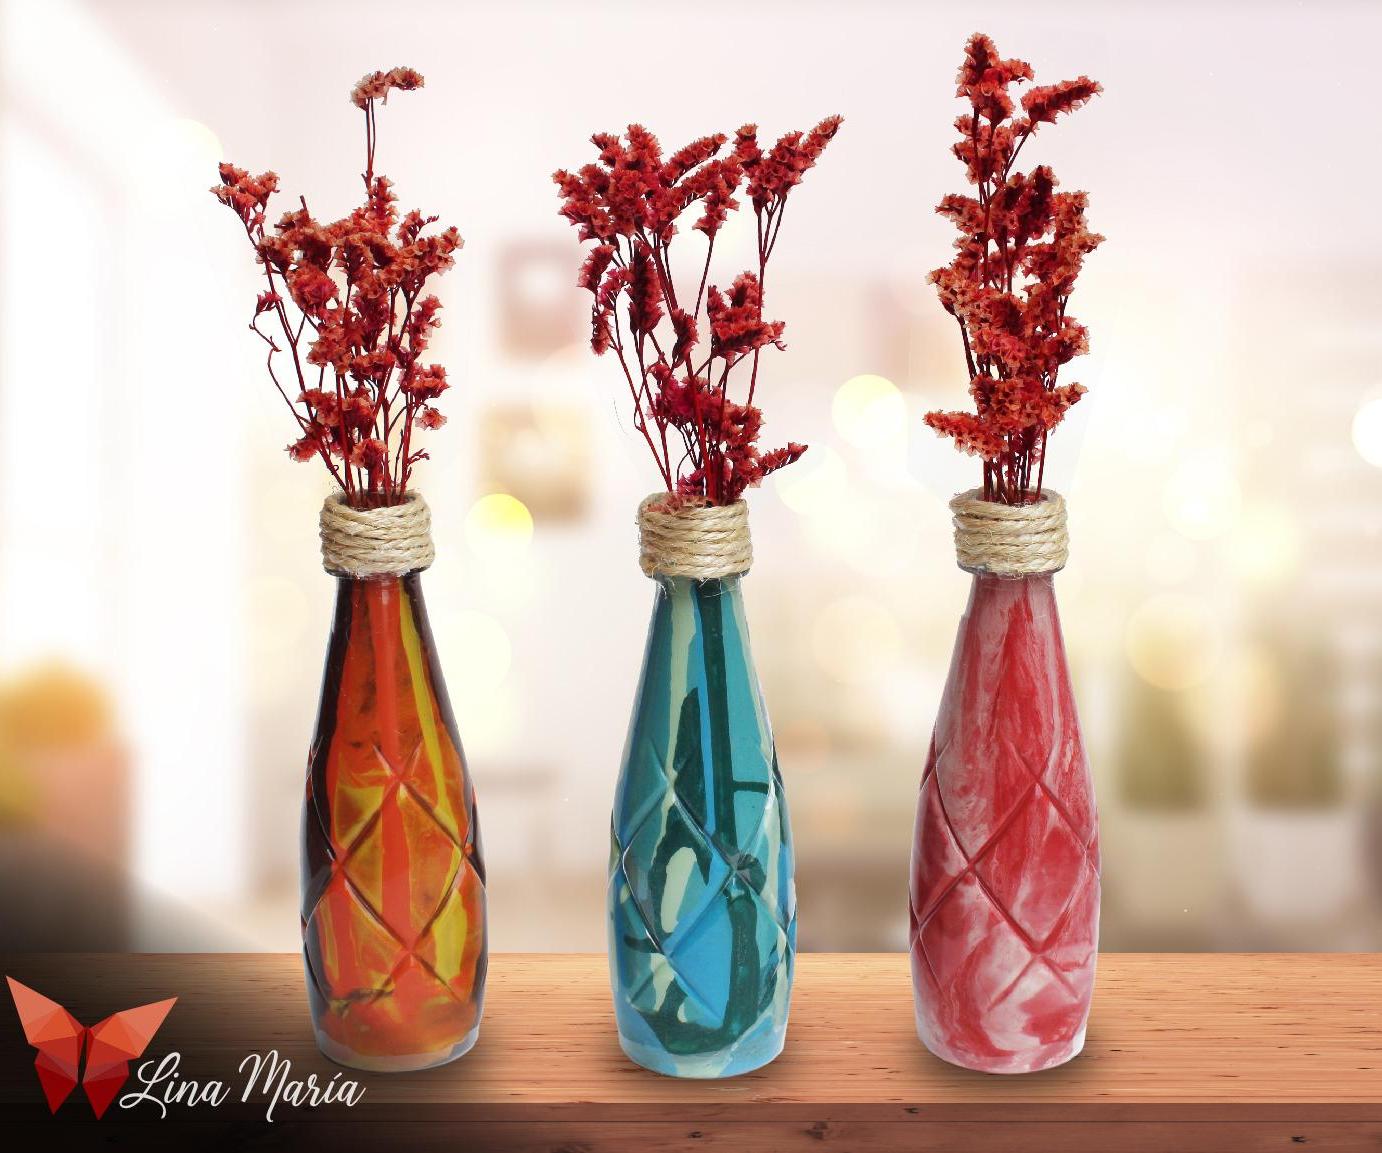 Flower Vases With Melted Crayons